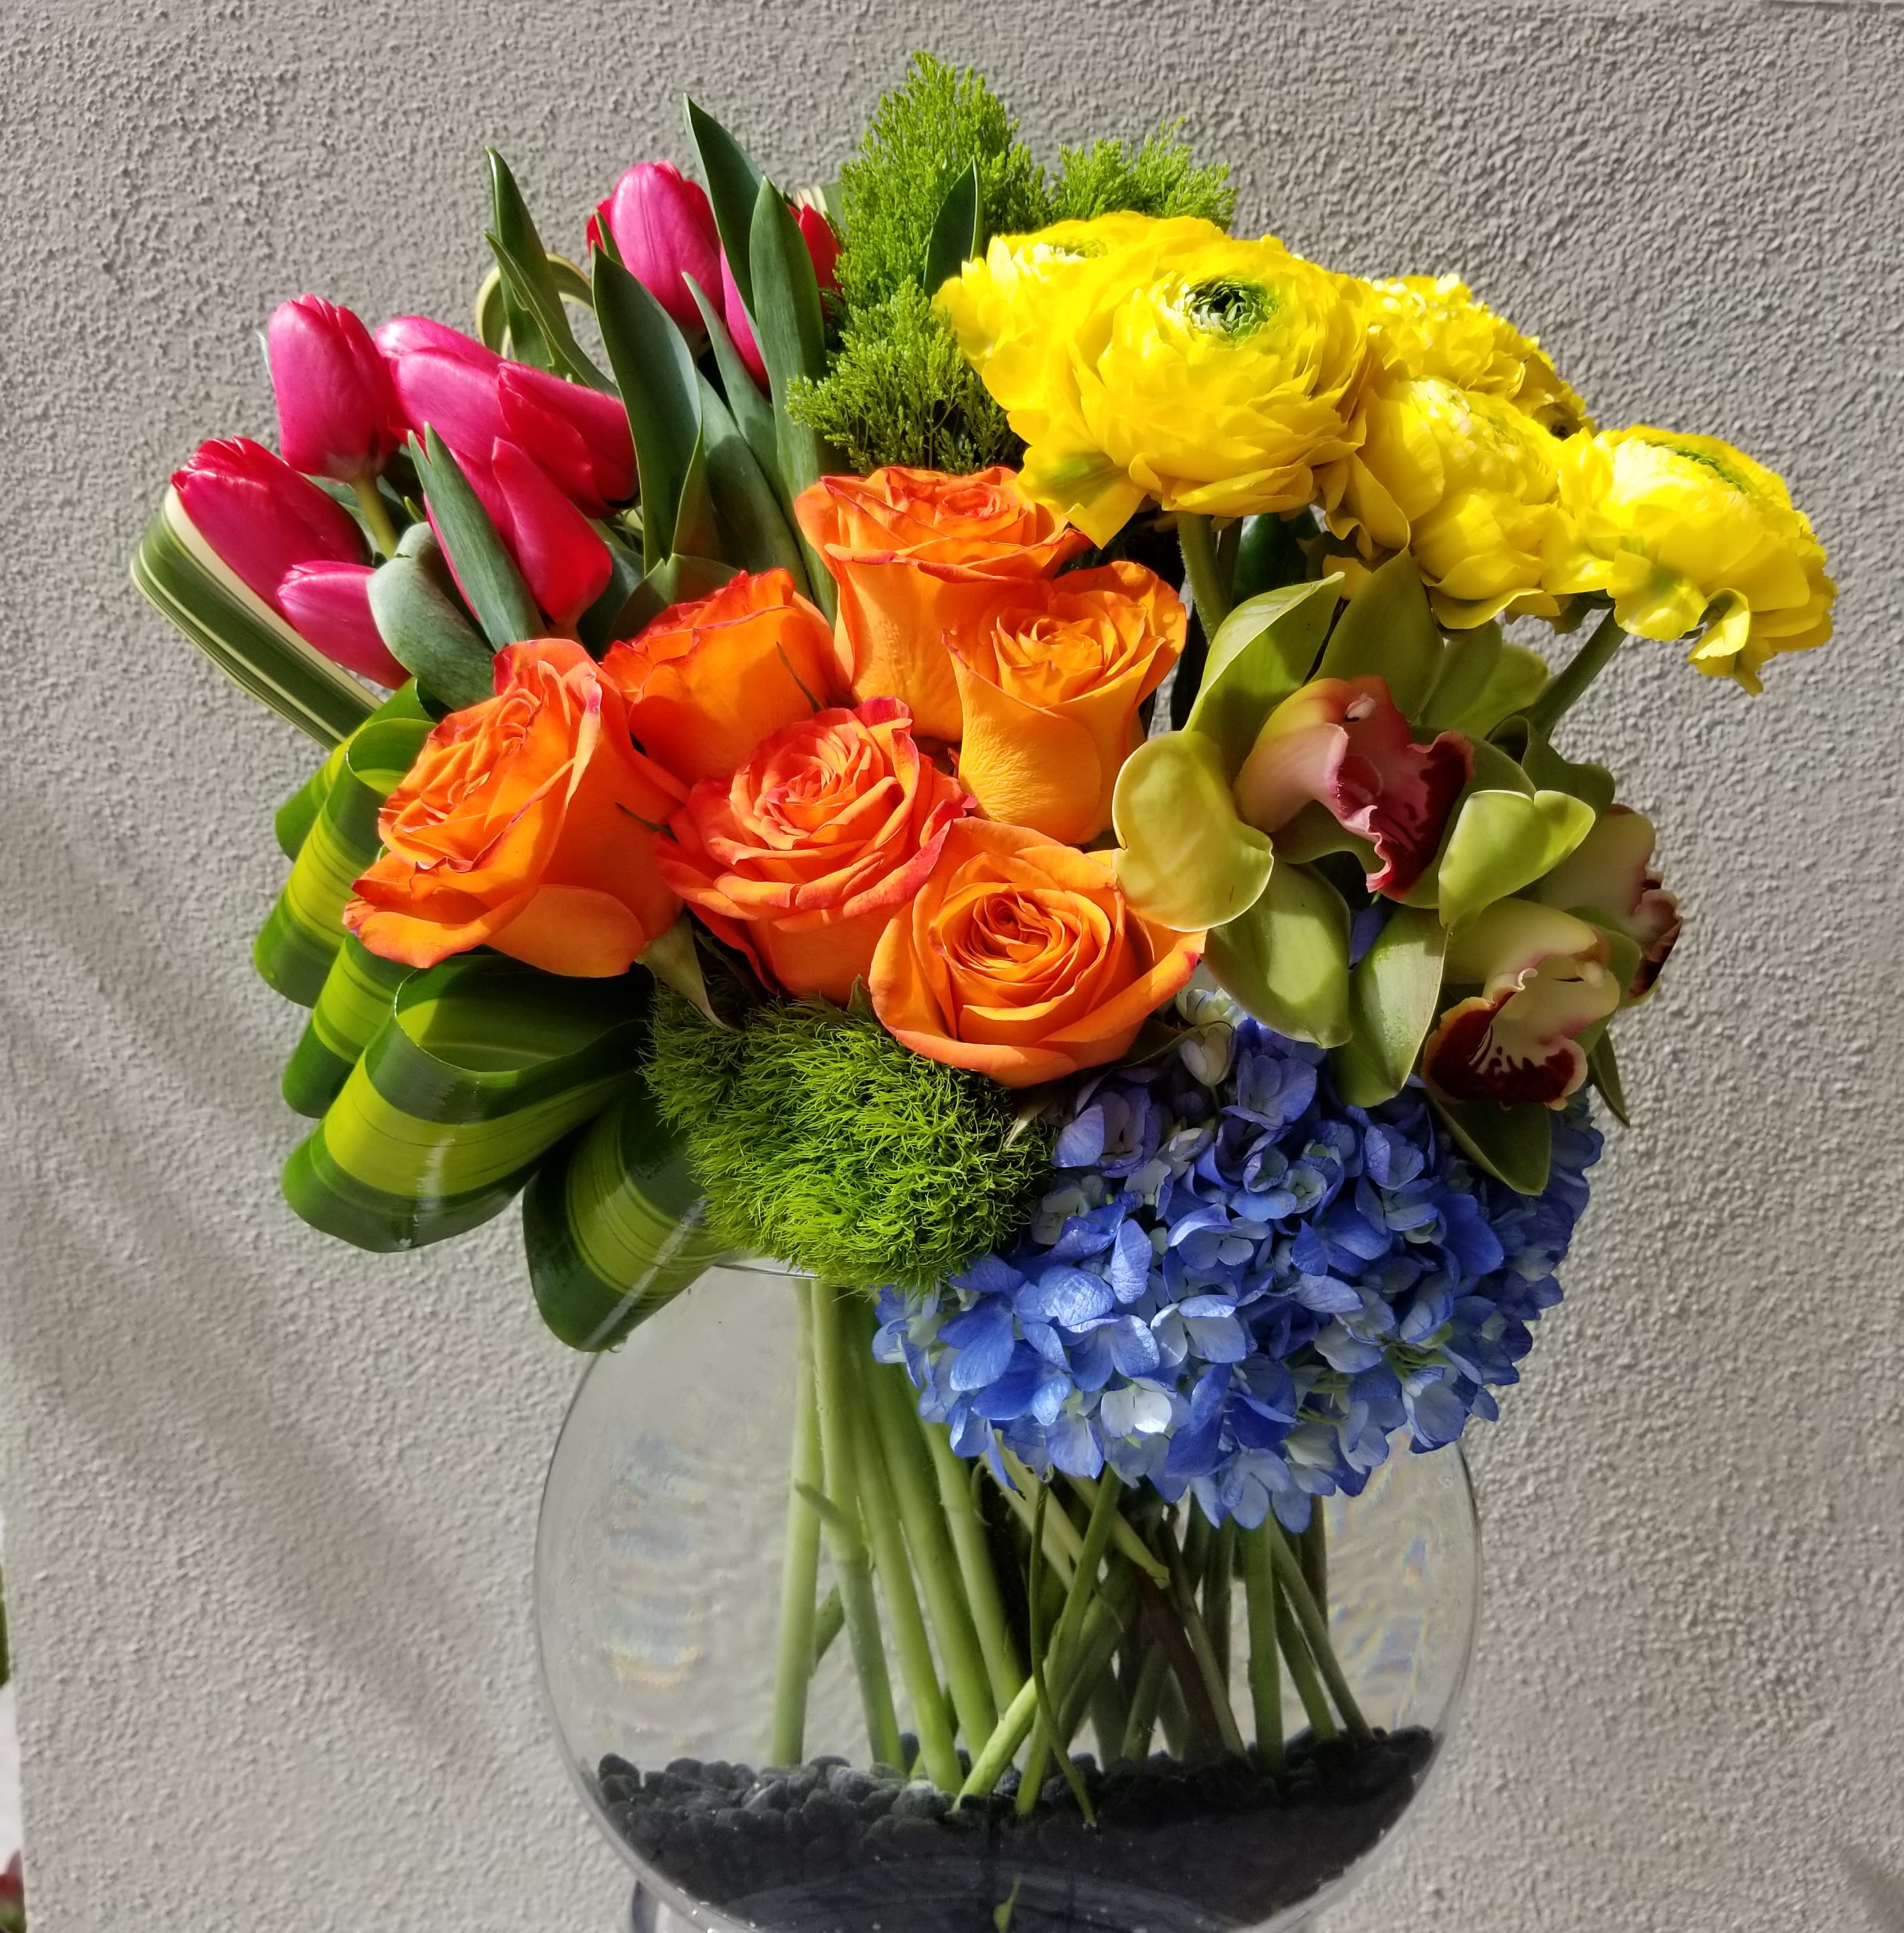 Radiant - Flat bowl composed of bright vibrant blooms such as hydrangeas, roses, ranunculus, tulips and orchids.